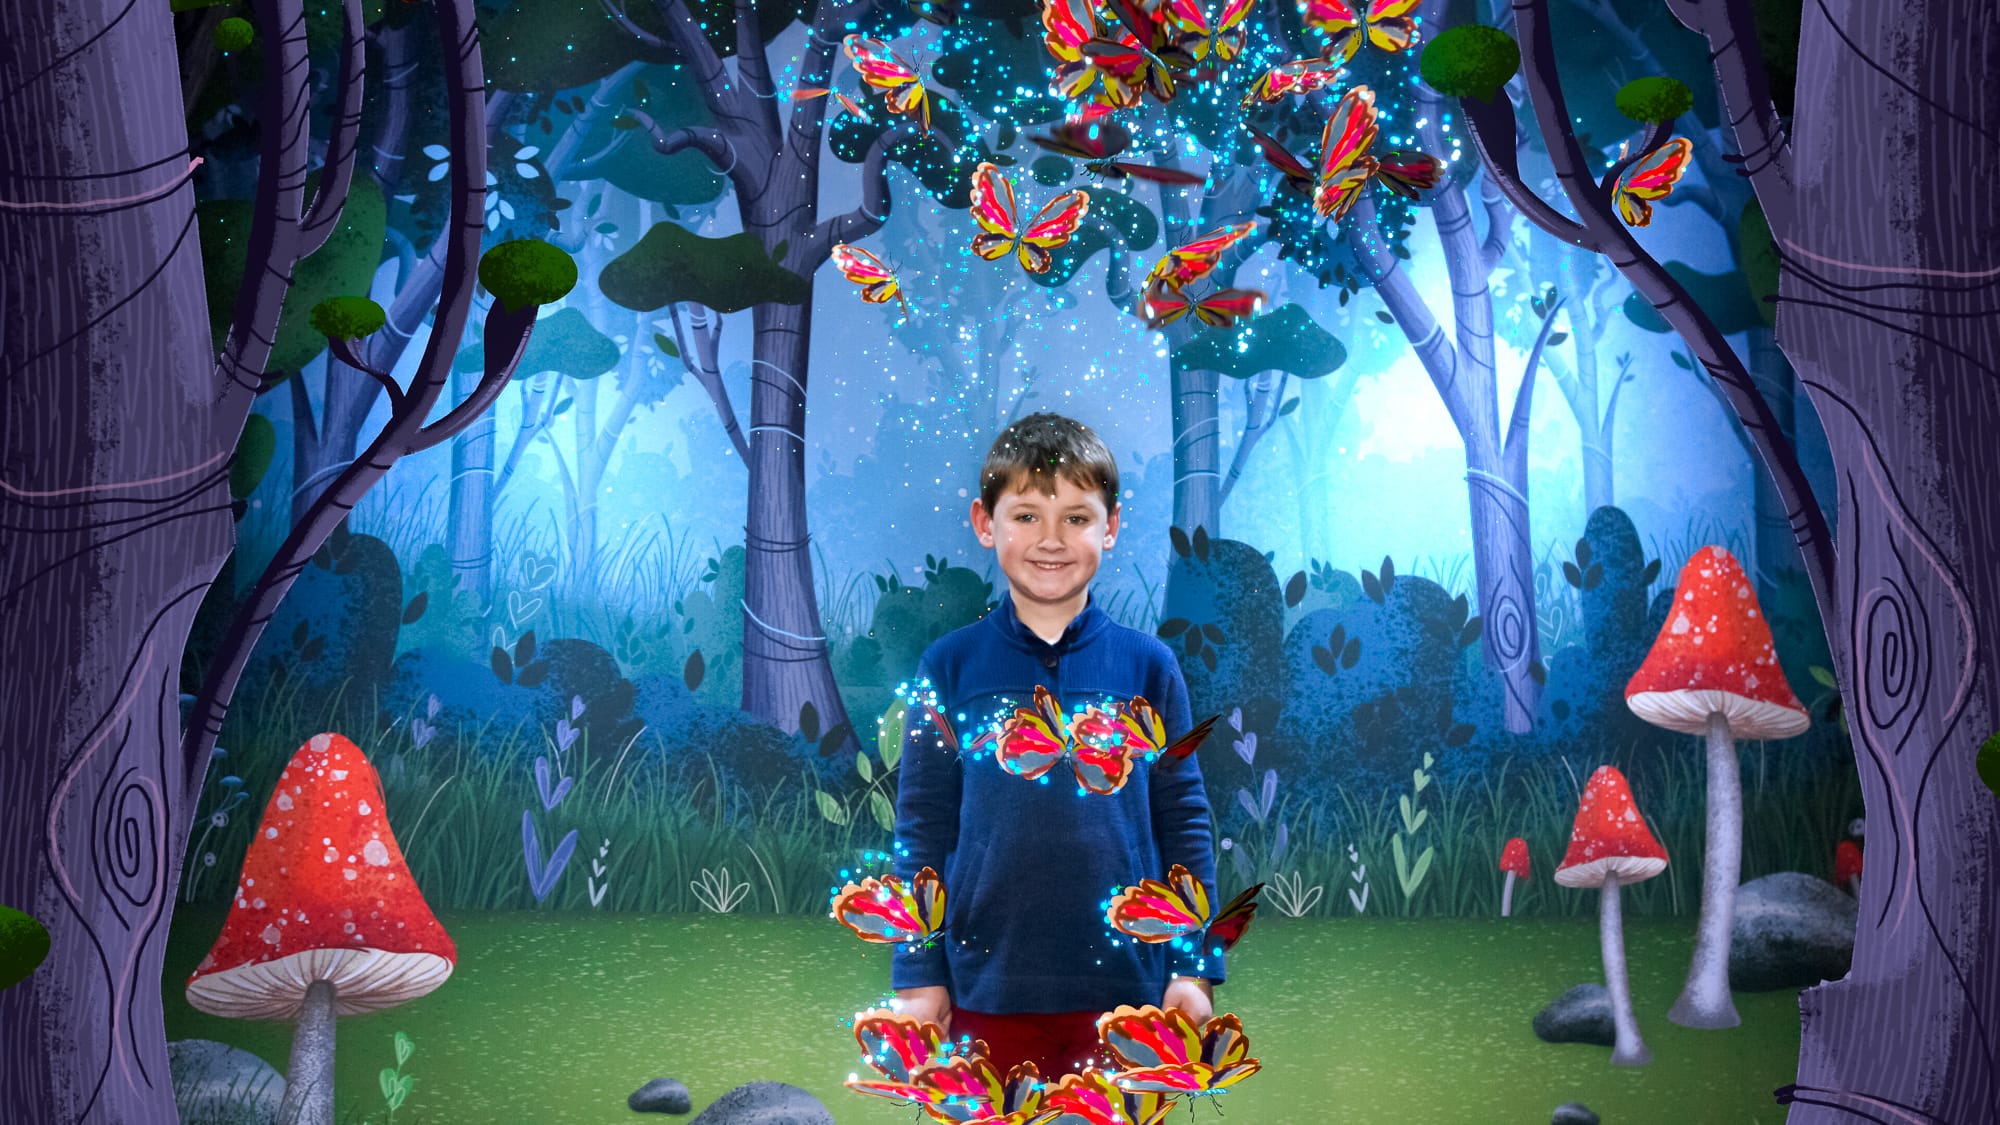 Young boy poses in the photo booth as animated butterflies rest on his arms